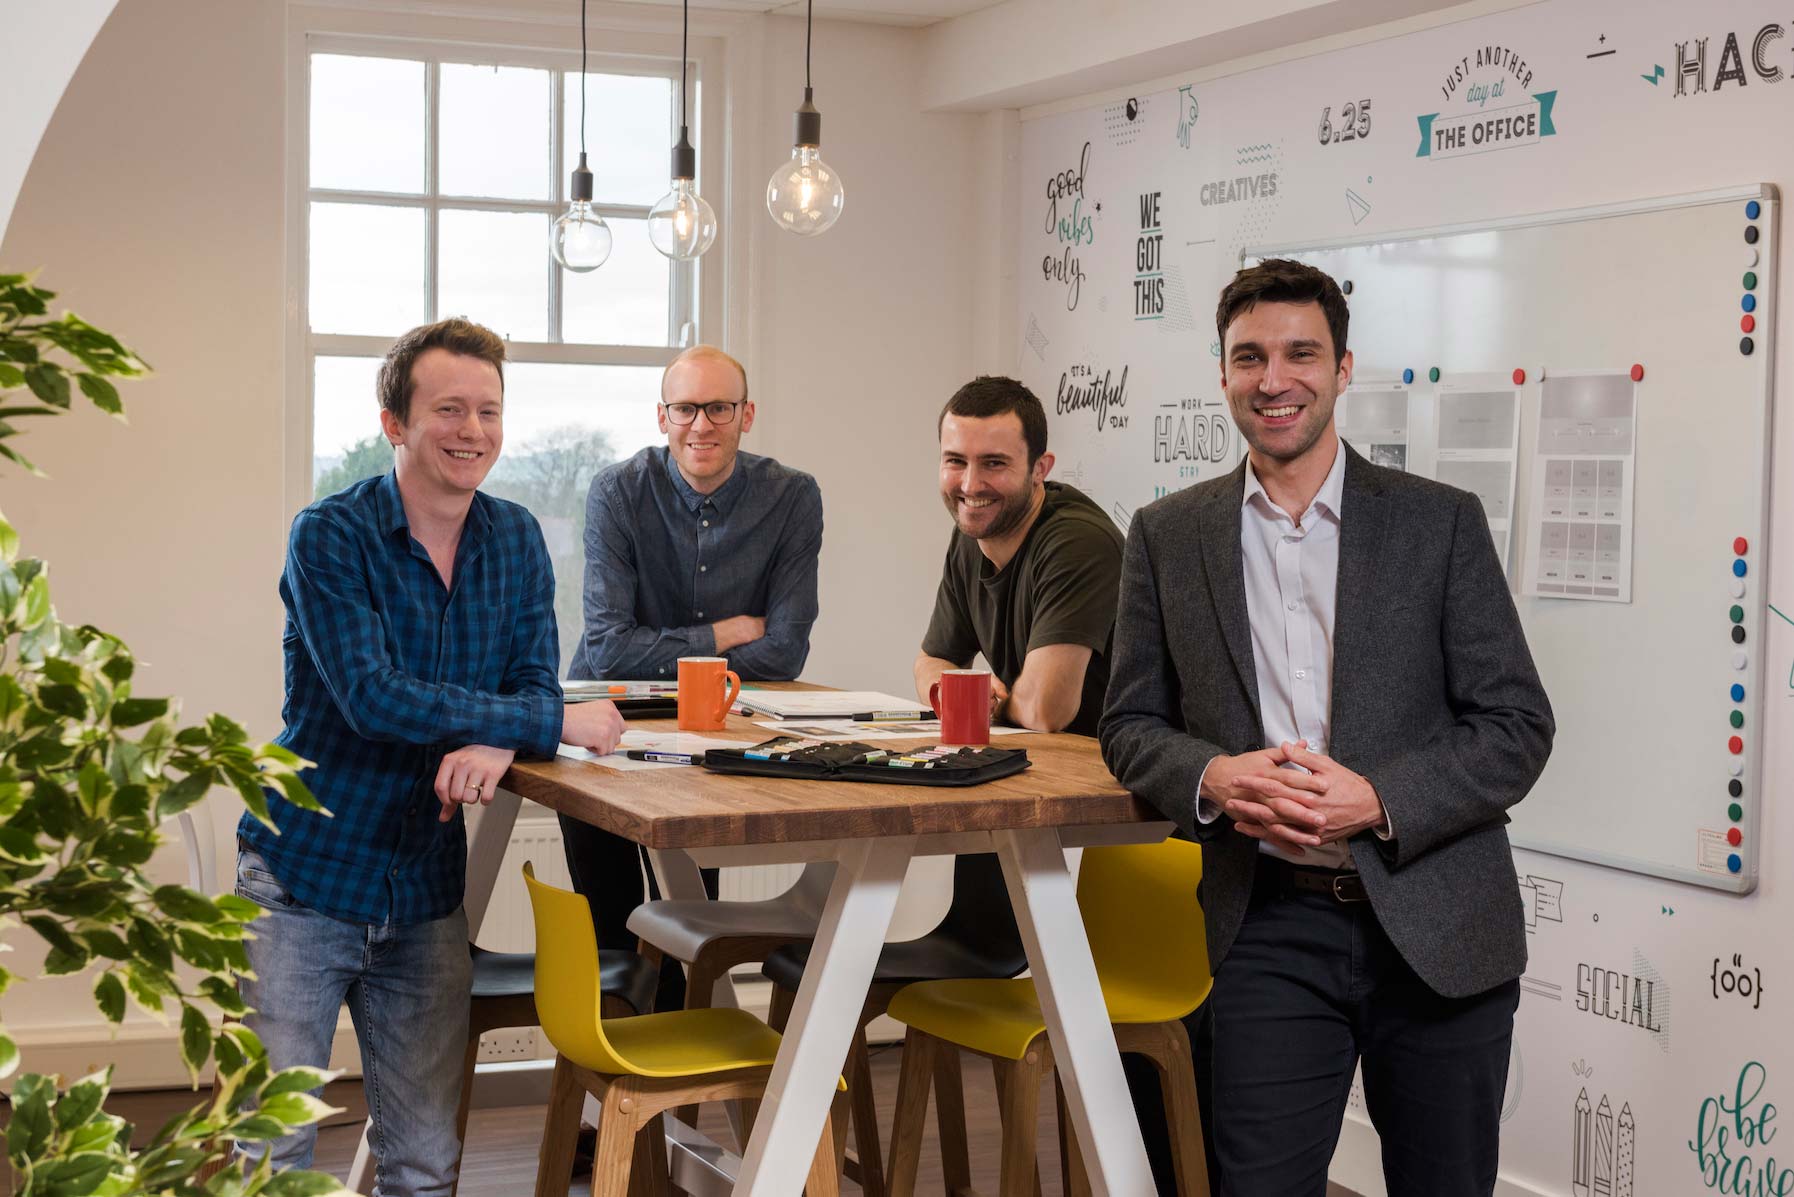 Shaun Molloy, Andy Farmer, Ben Convey and James Weller are among six new appointments to Extreme's team of digital experts